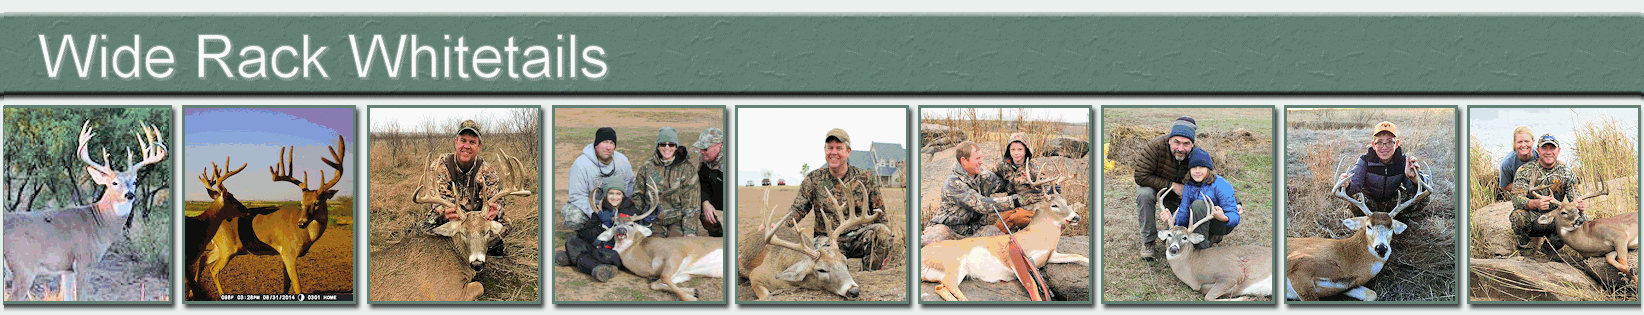 Guided Whitetail Deer Hunts & Hunting Ranch in Oklahoma | R&P Whitetails